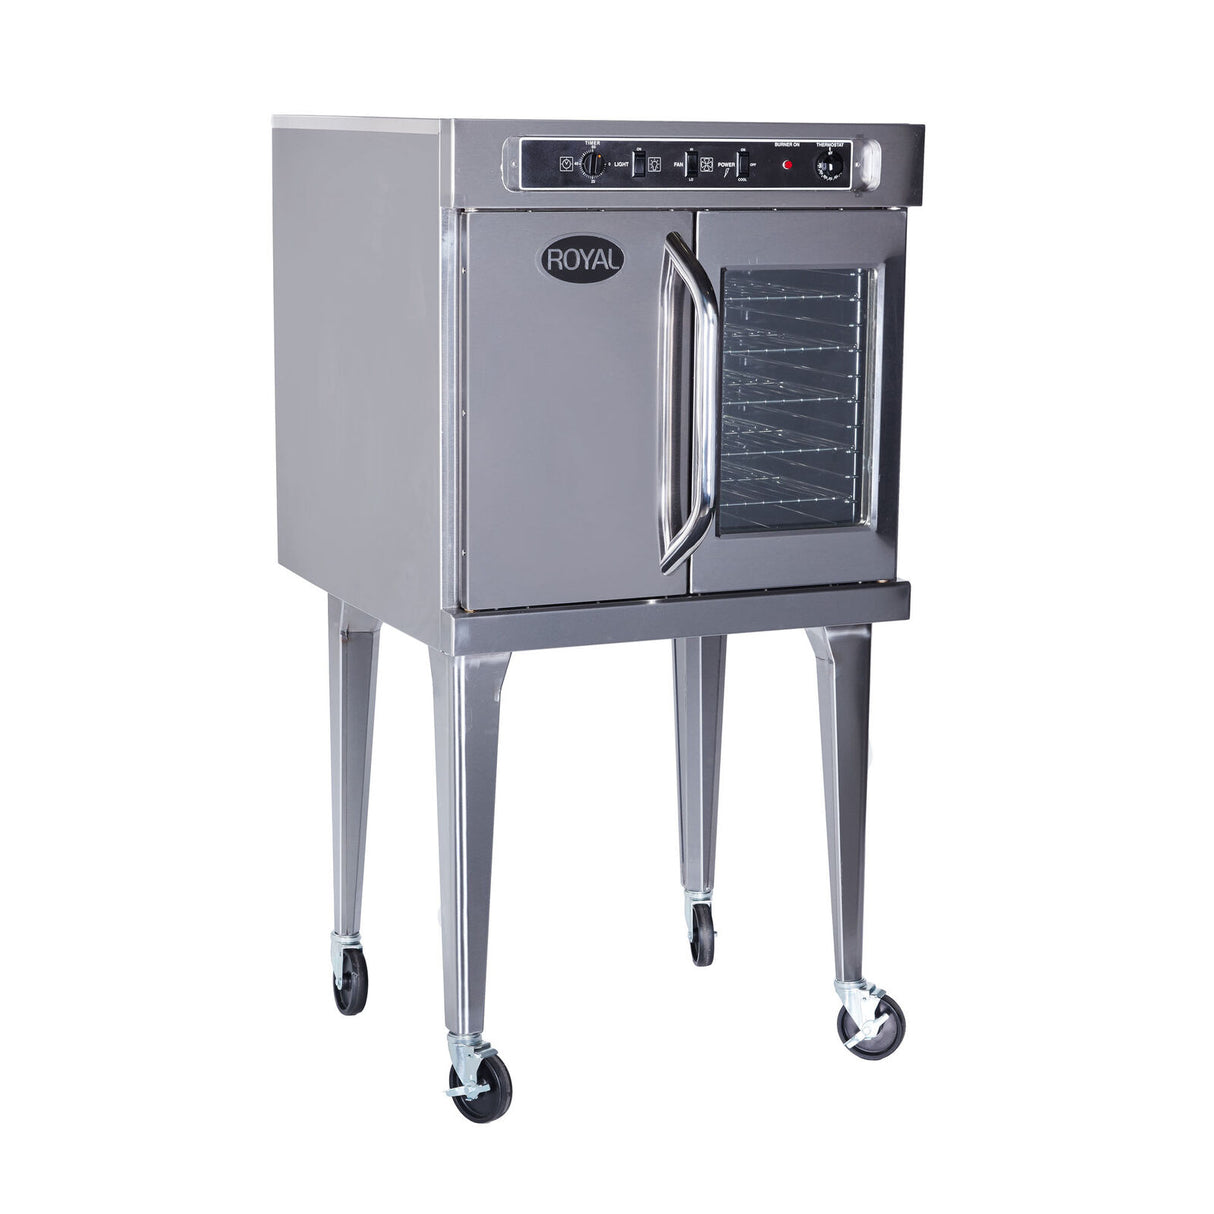 Royal Range RECOD-1 Convection Oven, Electric